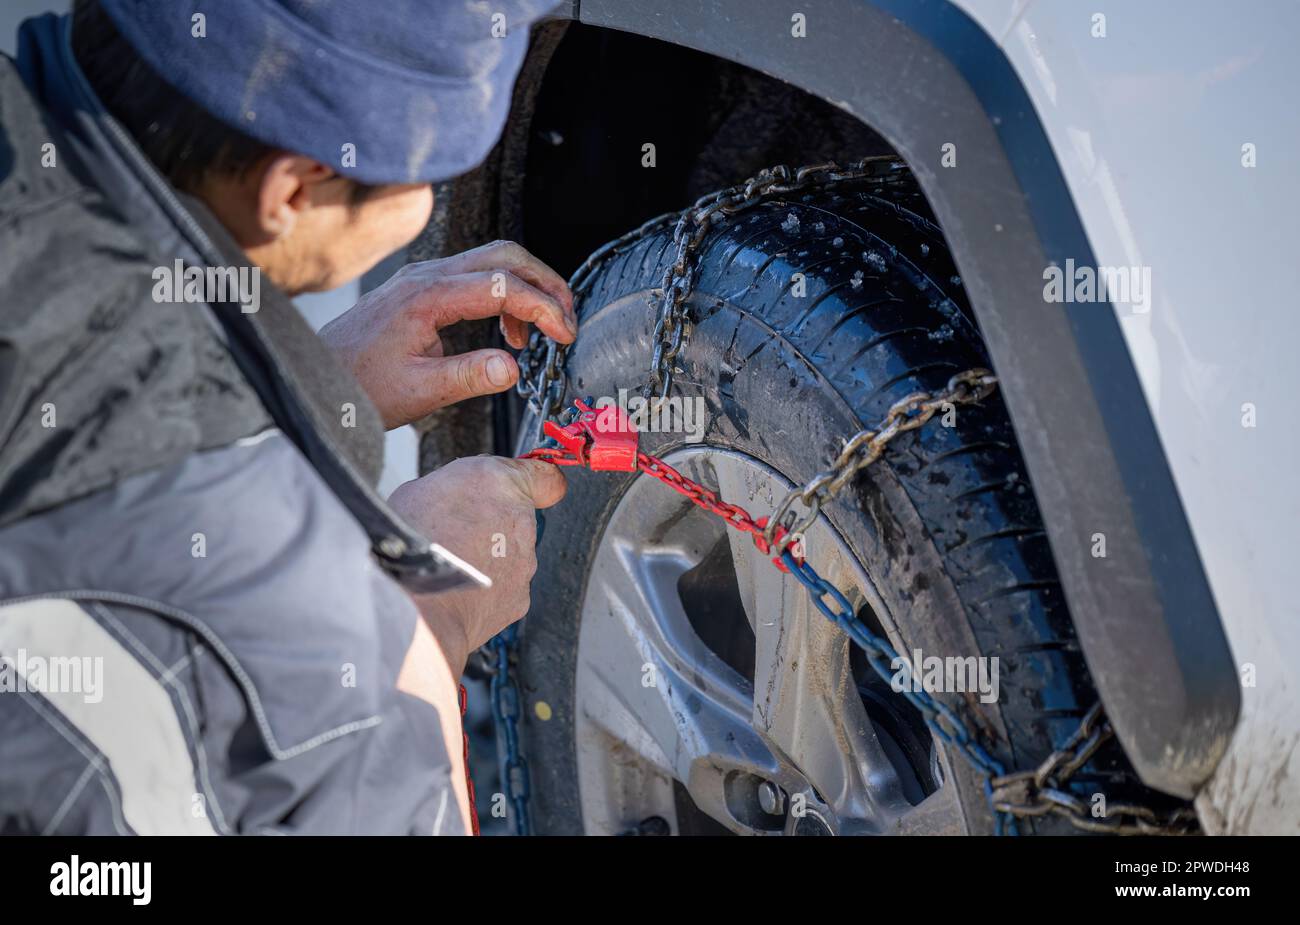 Man putting snow chains on his car wheels to improve traction in the winter weather condition. Stock Photo